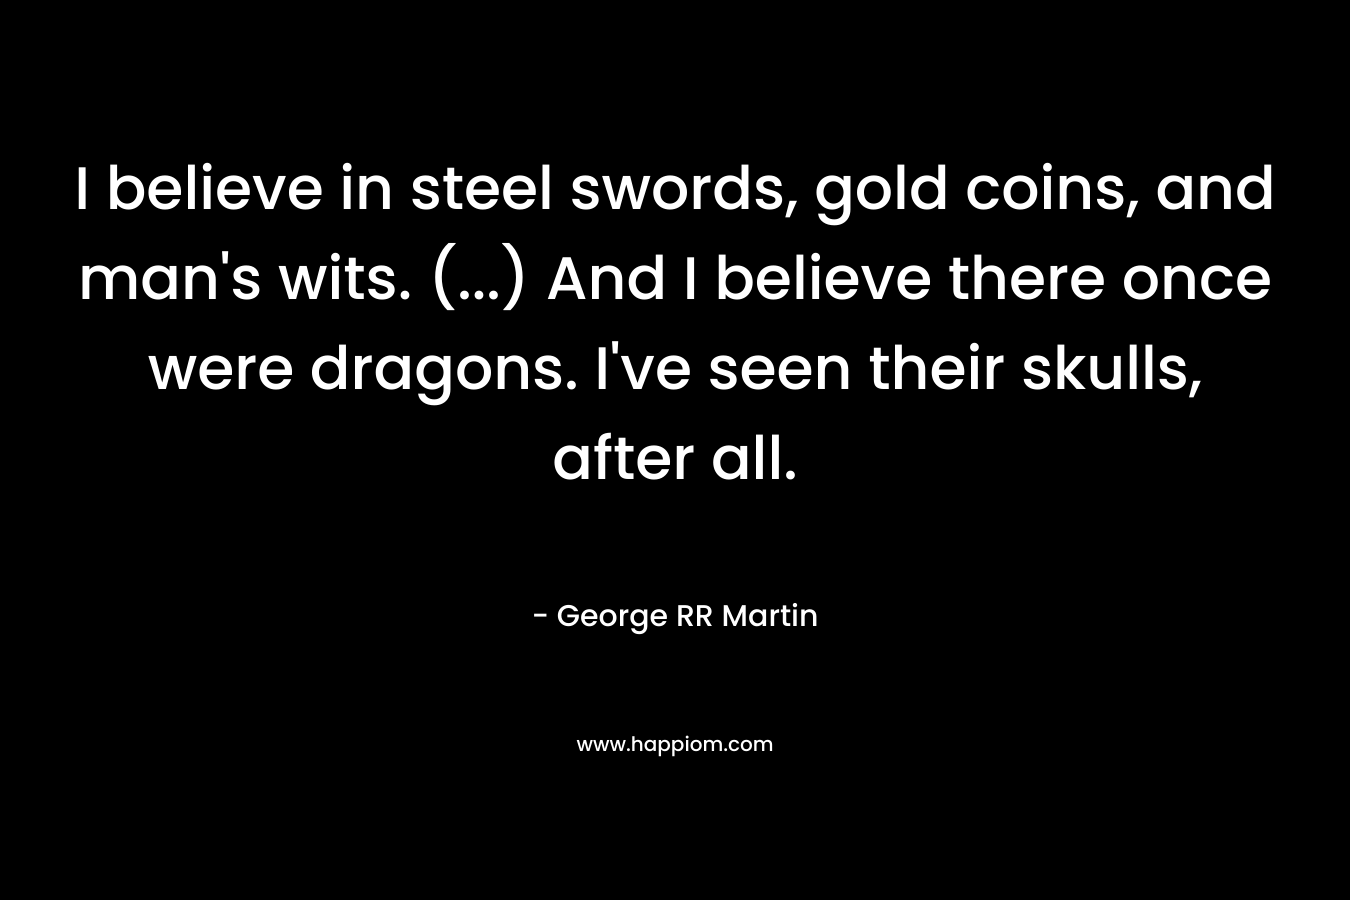 I believe in steel swords, gold coins, and man’s wits. (…) And I believe there once were dragons. I’ve seen their skulls, after all. – George RR Martin